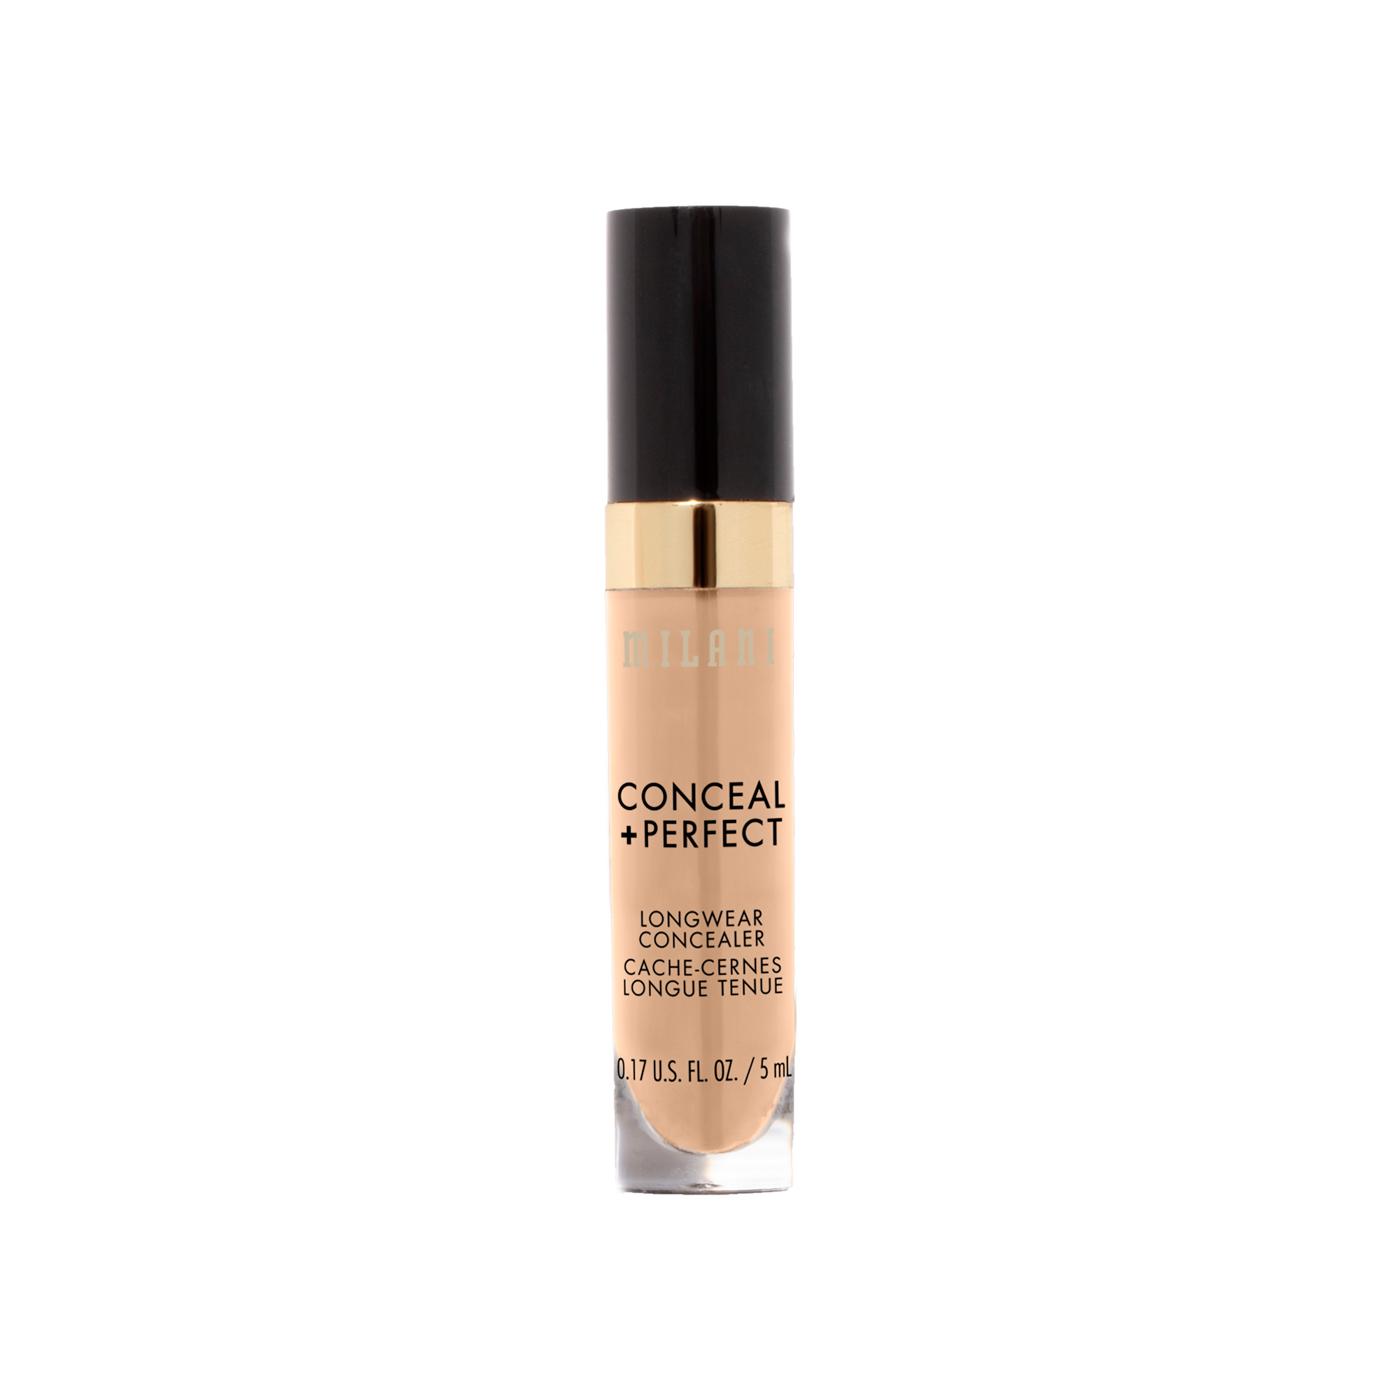 Milani Conceal +Perfect Longwear Concealer - Light Natural; image 1 of 6